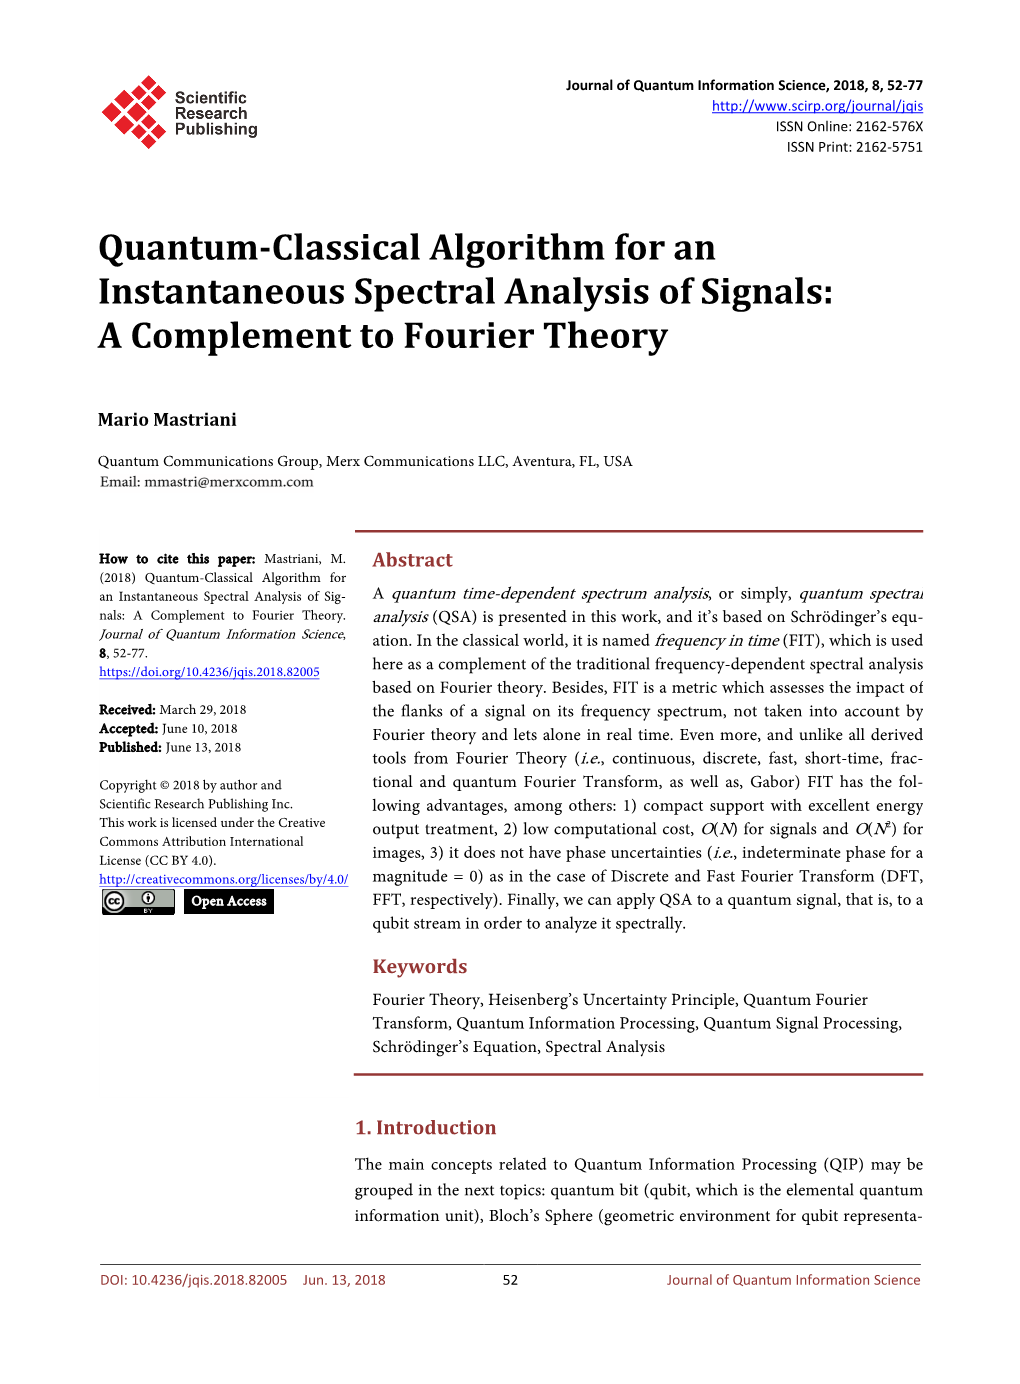 A Complement to Fourier Theory